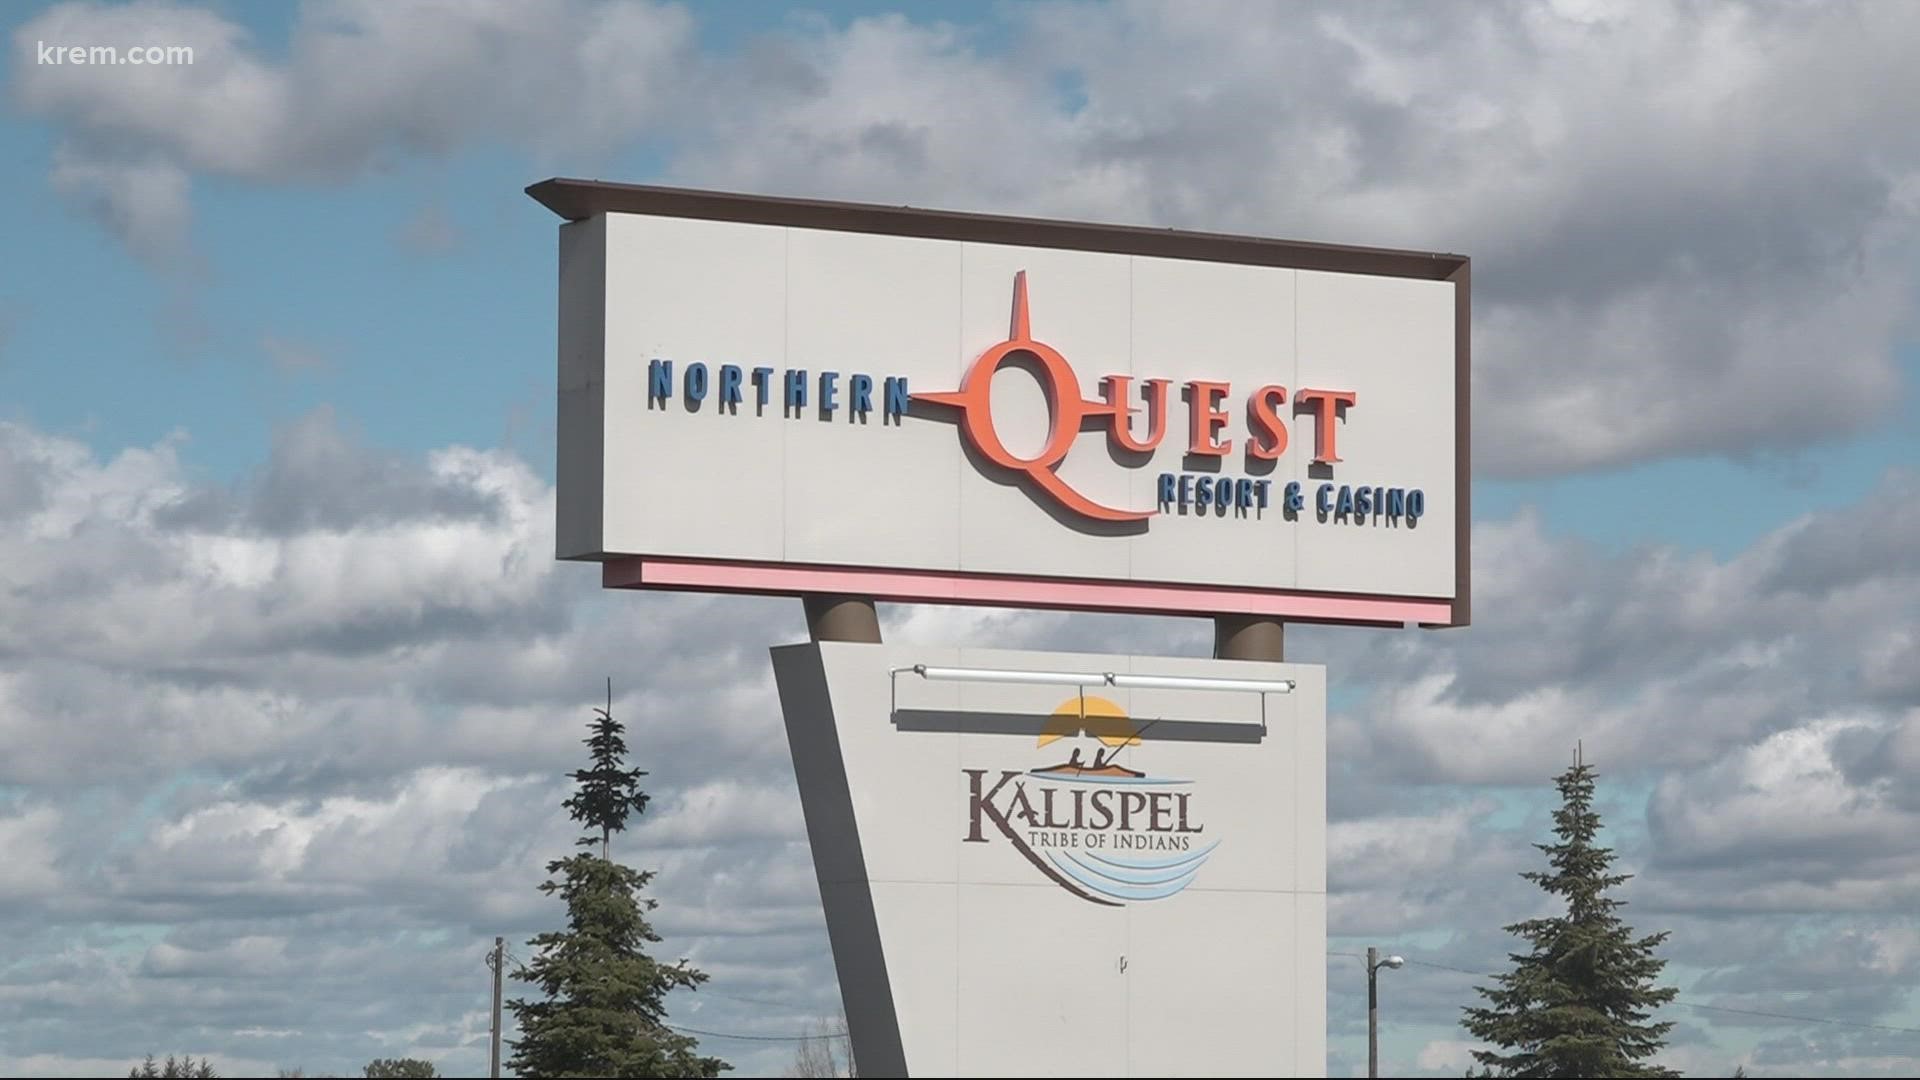 Northern Quest Casino is extending hours to accommodate the influx of NCAA betters coming in the next few days.